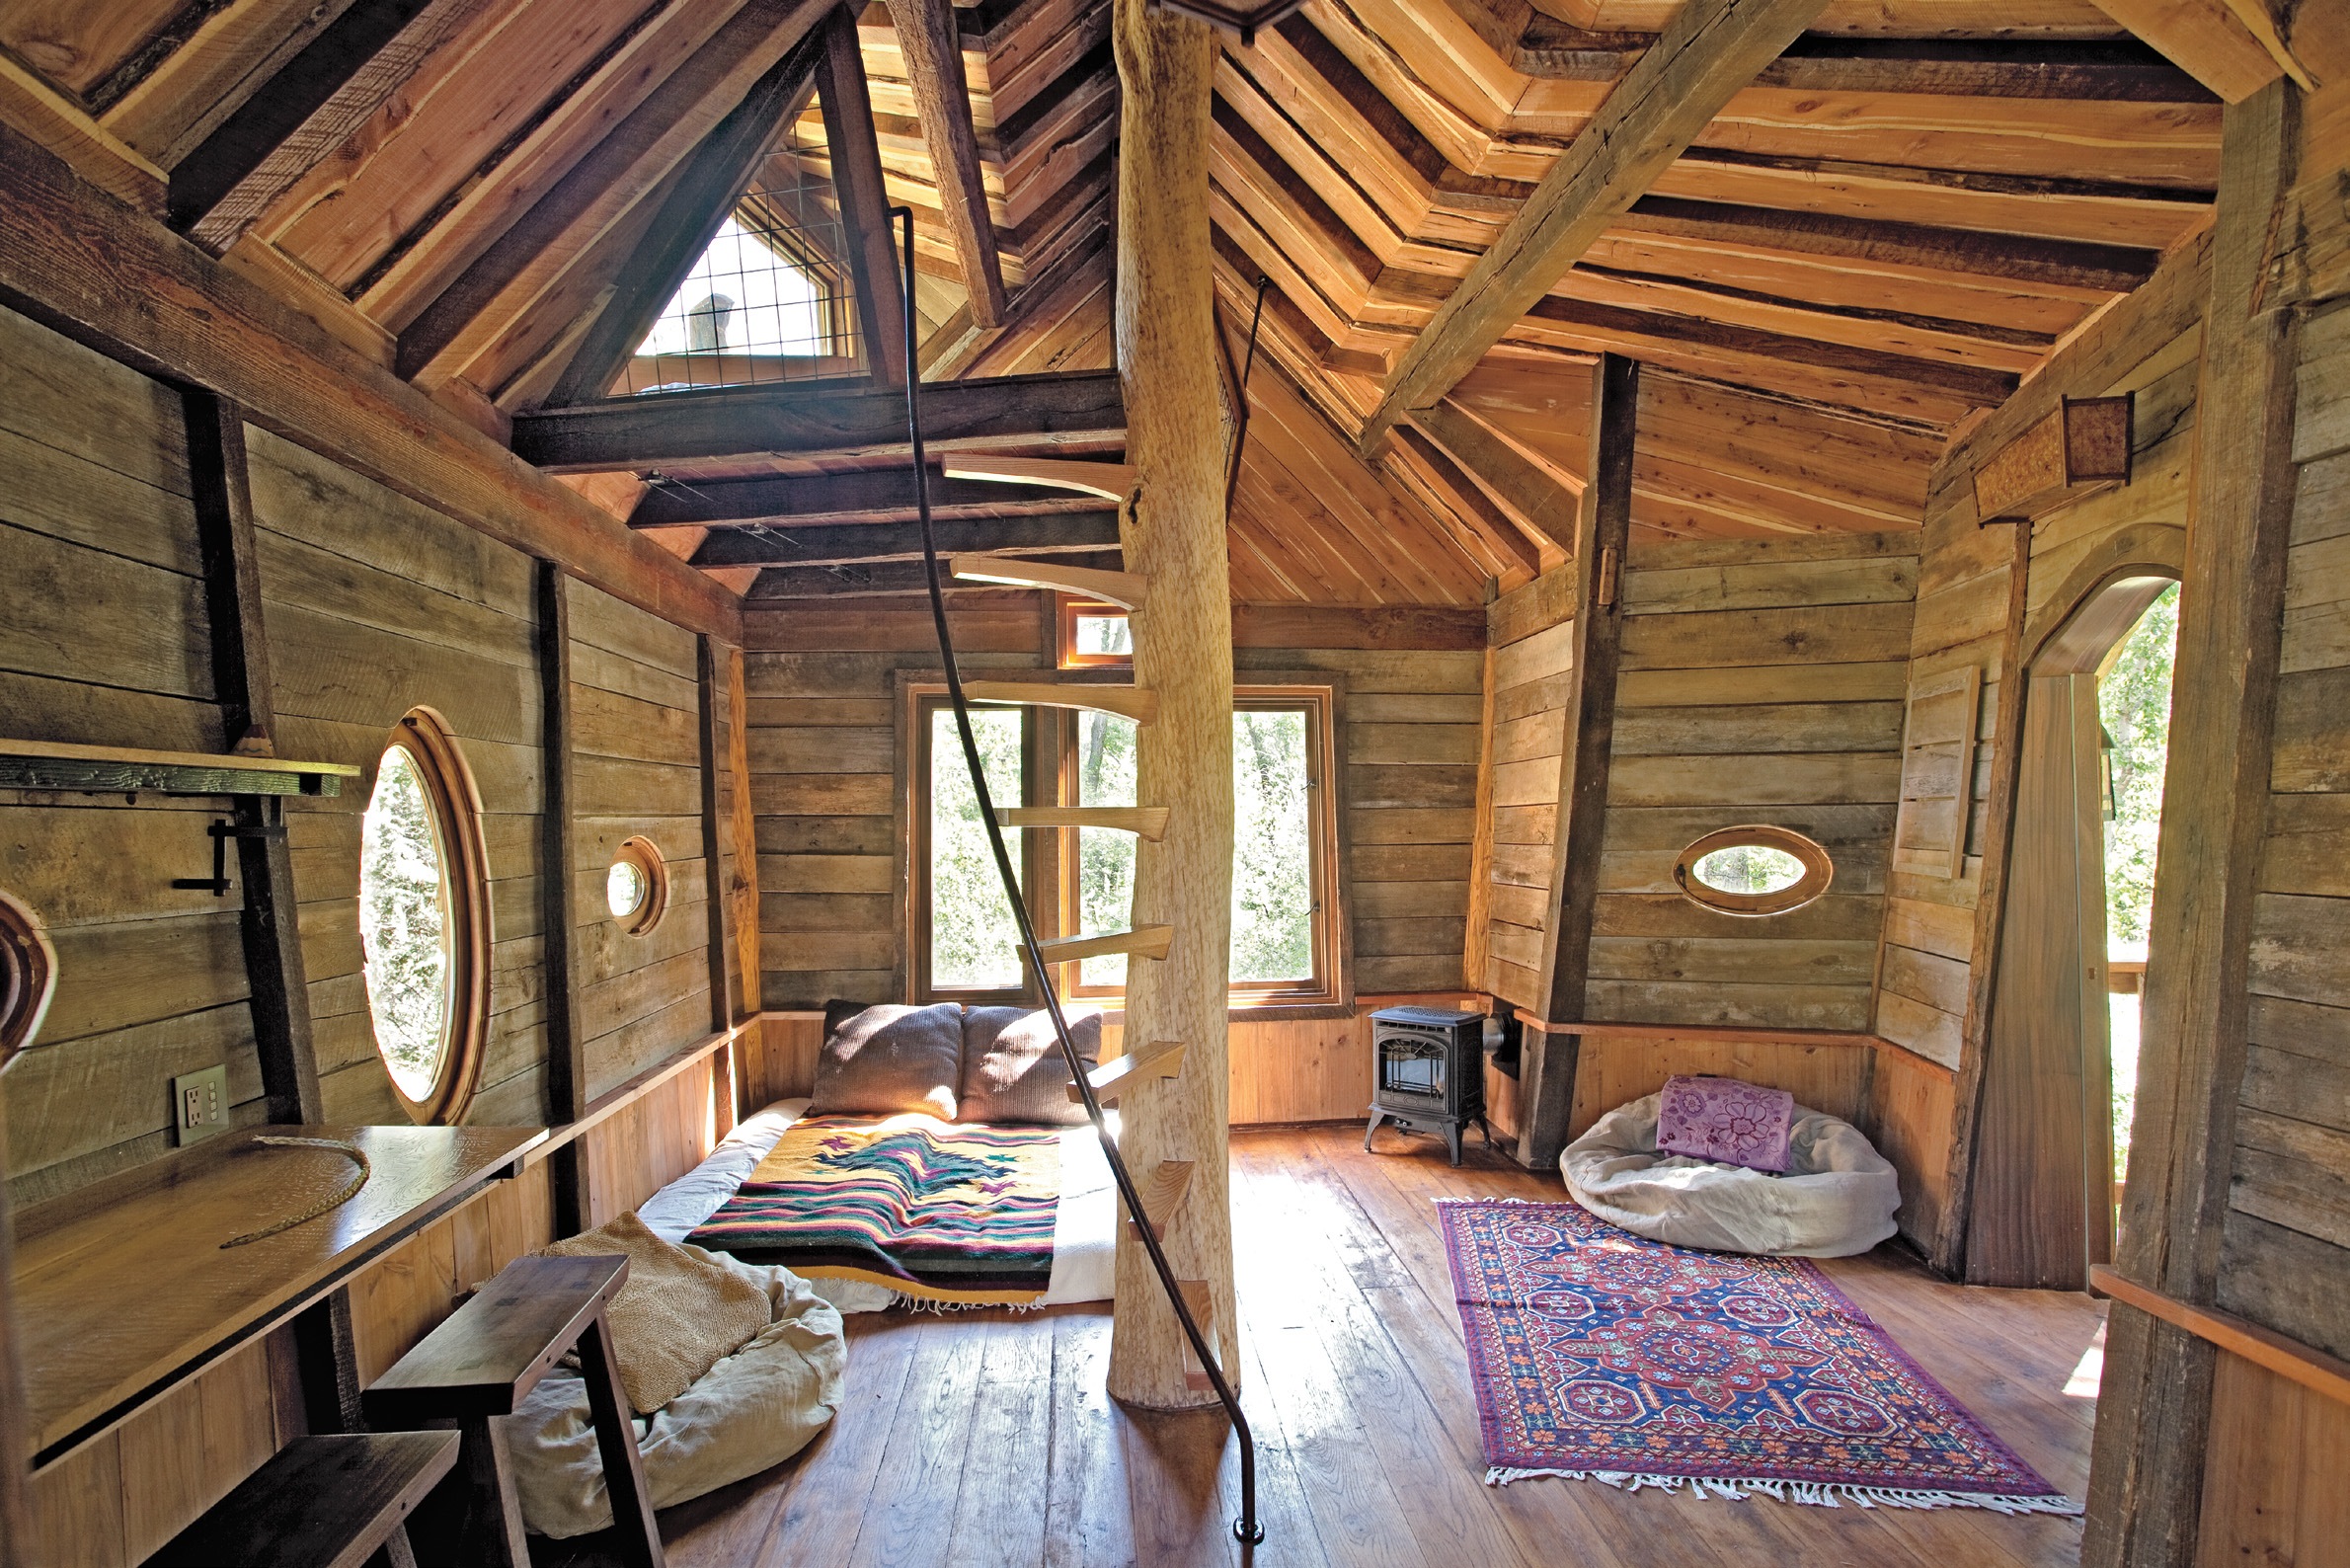 Interior of a treehouse built in Carbondale, CO by architect Stephen A 